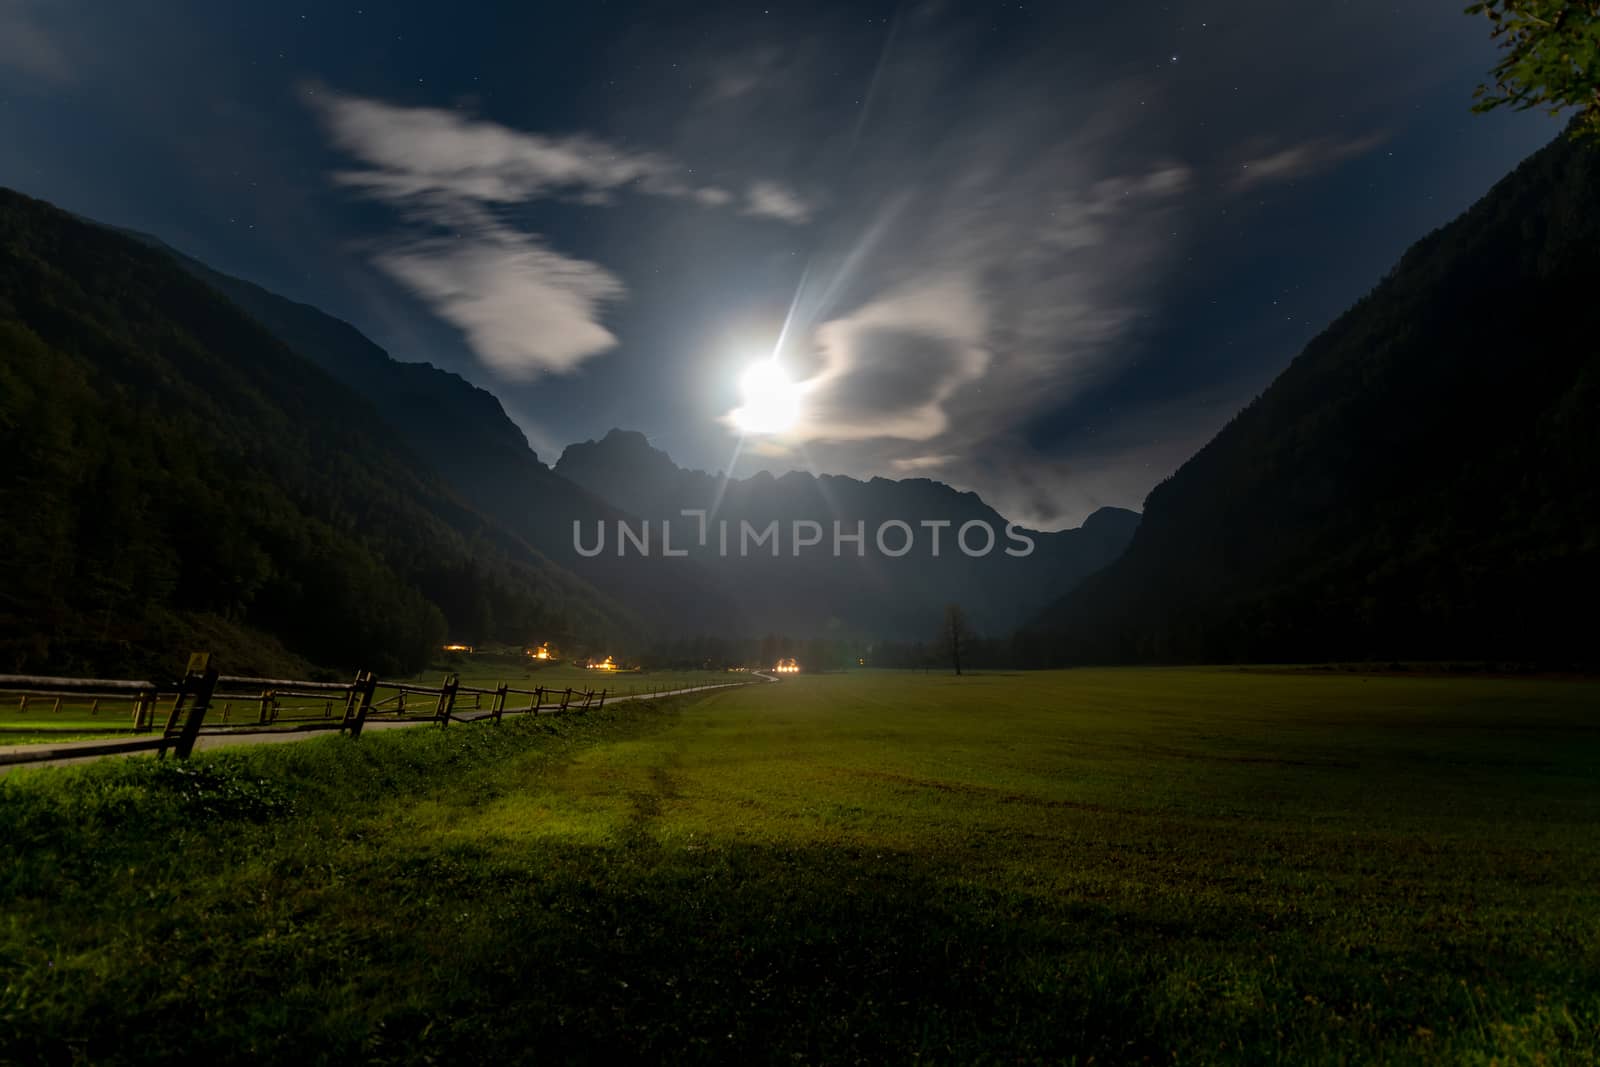 Alpine valley at night, landscape lit by full moon, stars visible, farmhouse with illuminated windows, mistyc and dreamy